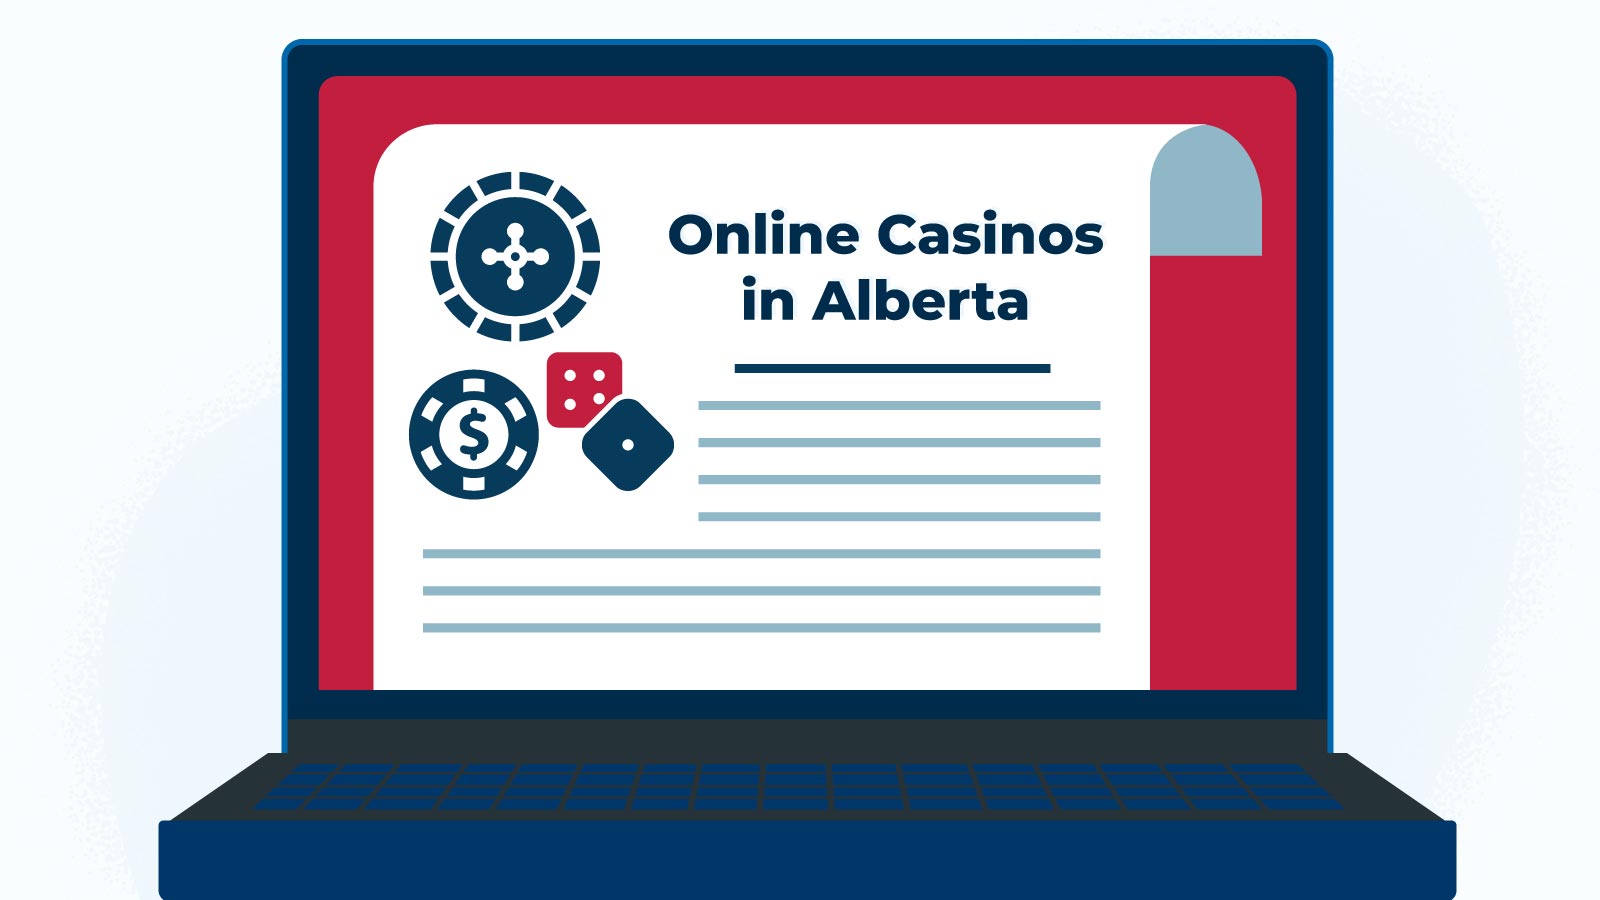 Things to know about Alberta Online Casinos